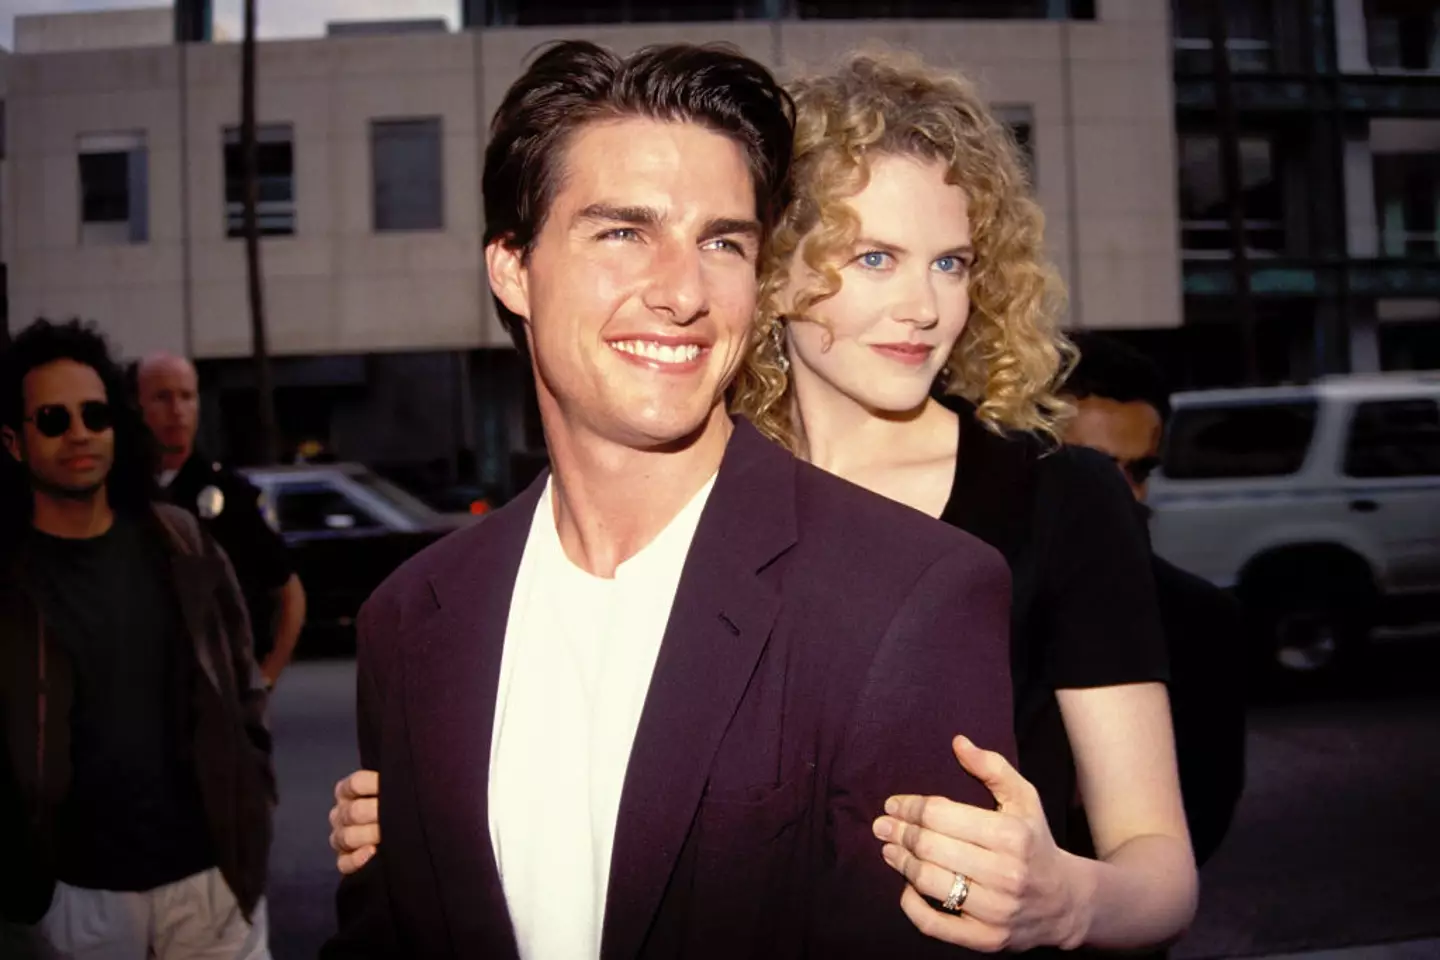 Nicole Kidman and Tom Cruise tied the knot back in 1990. (Vinnie Zuffante / Stringer / Getty Images)